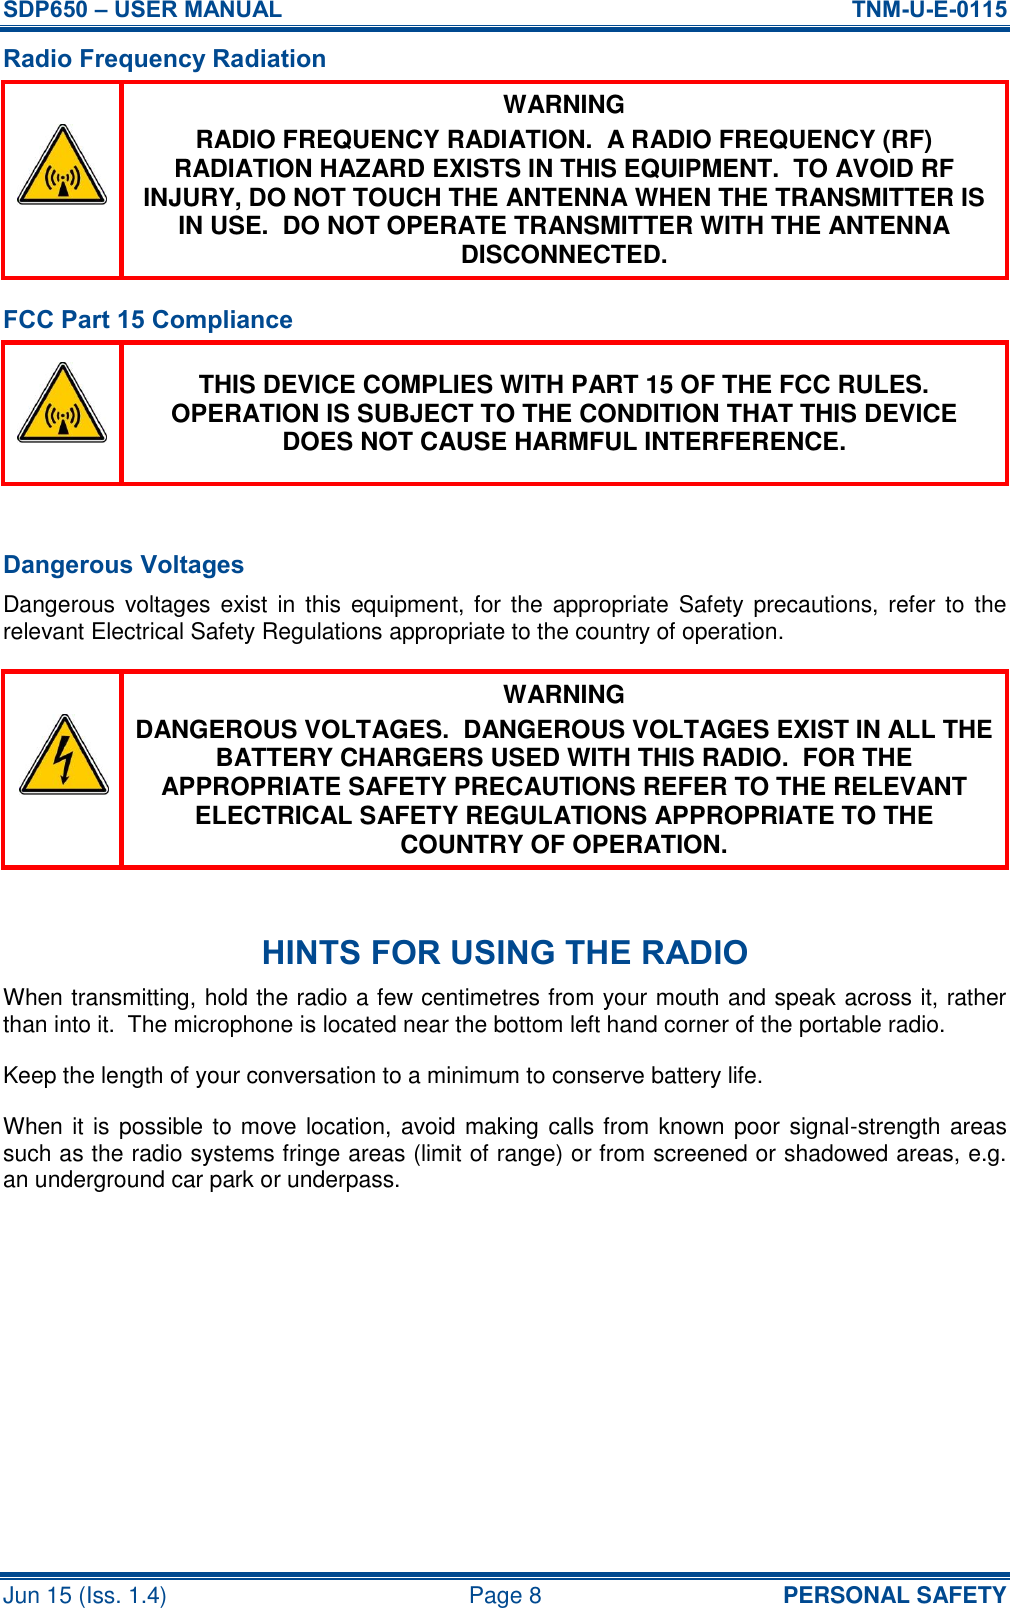 SDP650 – USER MANUAL  TNM-U-E-0115 Jun 15 (Iss. 1.4)  Page 8  PERSONAL SAFETY Radio Frequency Radiation  WARNING RADIO FREQUENCY RADIATION.  A RADIO FREQUENCY (RF) RADIATION HAZARD EXISTS IN THIS EQUIPMENT.  TO AVOID RF INJURY, DO NOT TOUCH THE ANTENNA WHEN THE TRANSMITTER IS IN USE.  DO NOT OPERATE TRANSMITTER WITH THE ANTENNA DISCONNECTED. FCC Part 15 Compliance  THIS DEVICE COMPLIES WITH PART 15 OF THE FCC RULES.  OPERATION IS SUBJECT TO THE CONDITION THAT THIS DEVICE DOES NOT CAUSE HARMFUL INTERFERENCE.  Dangerous Voltages Dangerous voltages exist  in this  equipment, for the appropriate Safety precautions, refer to the relevant Electrical Safety Regulations appropriate to the country of operation.  WARNING DANGEROUS VOLTAGES.  DANGEROUS VOLTAGES EXIST IN ALL THE BATTERY CHARGERS USED WITH THIS RADIO.  FOR THE APPROPRIATE SAFETY PRECAUTIONS REFER TO THE RELEVANT ELECTRICAL SAFETY REGULATIONS APPROPRIATE TO THE COUNTRY OF OPERATION.  HINTS FOR USING THE RADIO When transmitting, hold the radio a few centimetres from your mouth and speak across it, rather than into it.  The microphone is located near the bottom left hand corner of the portable radio. Keep the length of your conversation to a minimum to conserve battery life. When it is possible to move location, avoid making calls from known poor signal-strength areas such as the radio systems fringe areas (limit of range) or from screened or shadowed areas, e.g. an underground car park or underpass.    